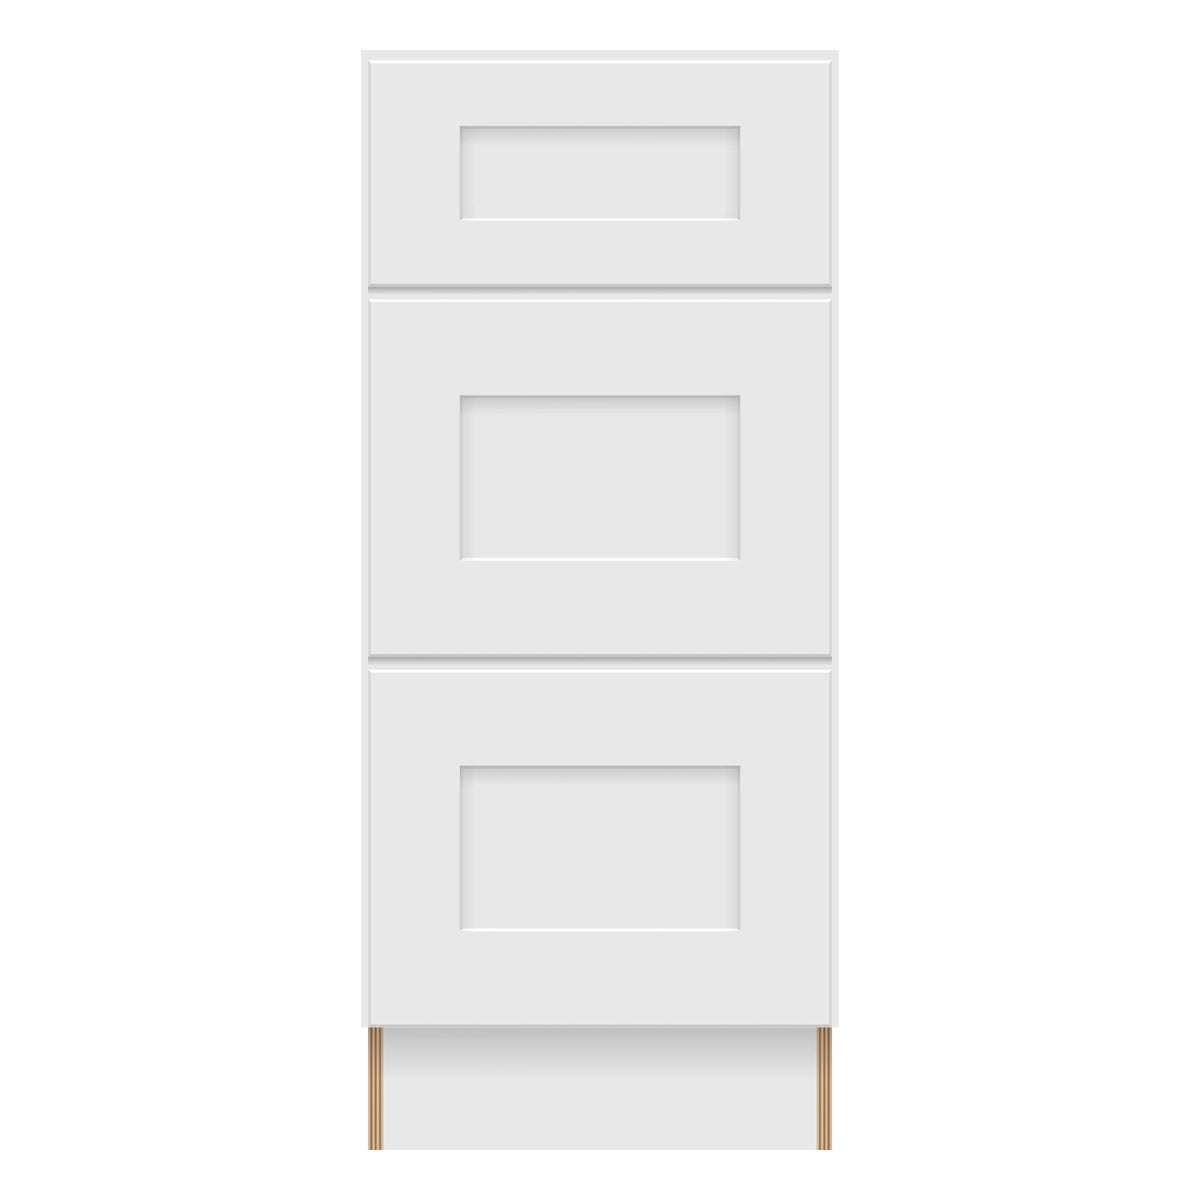 Craft Cabinetry Shaker White 15"W Drawer Base Cabinet